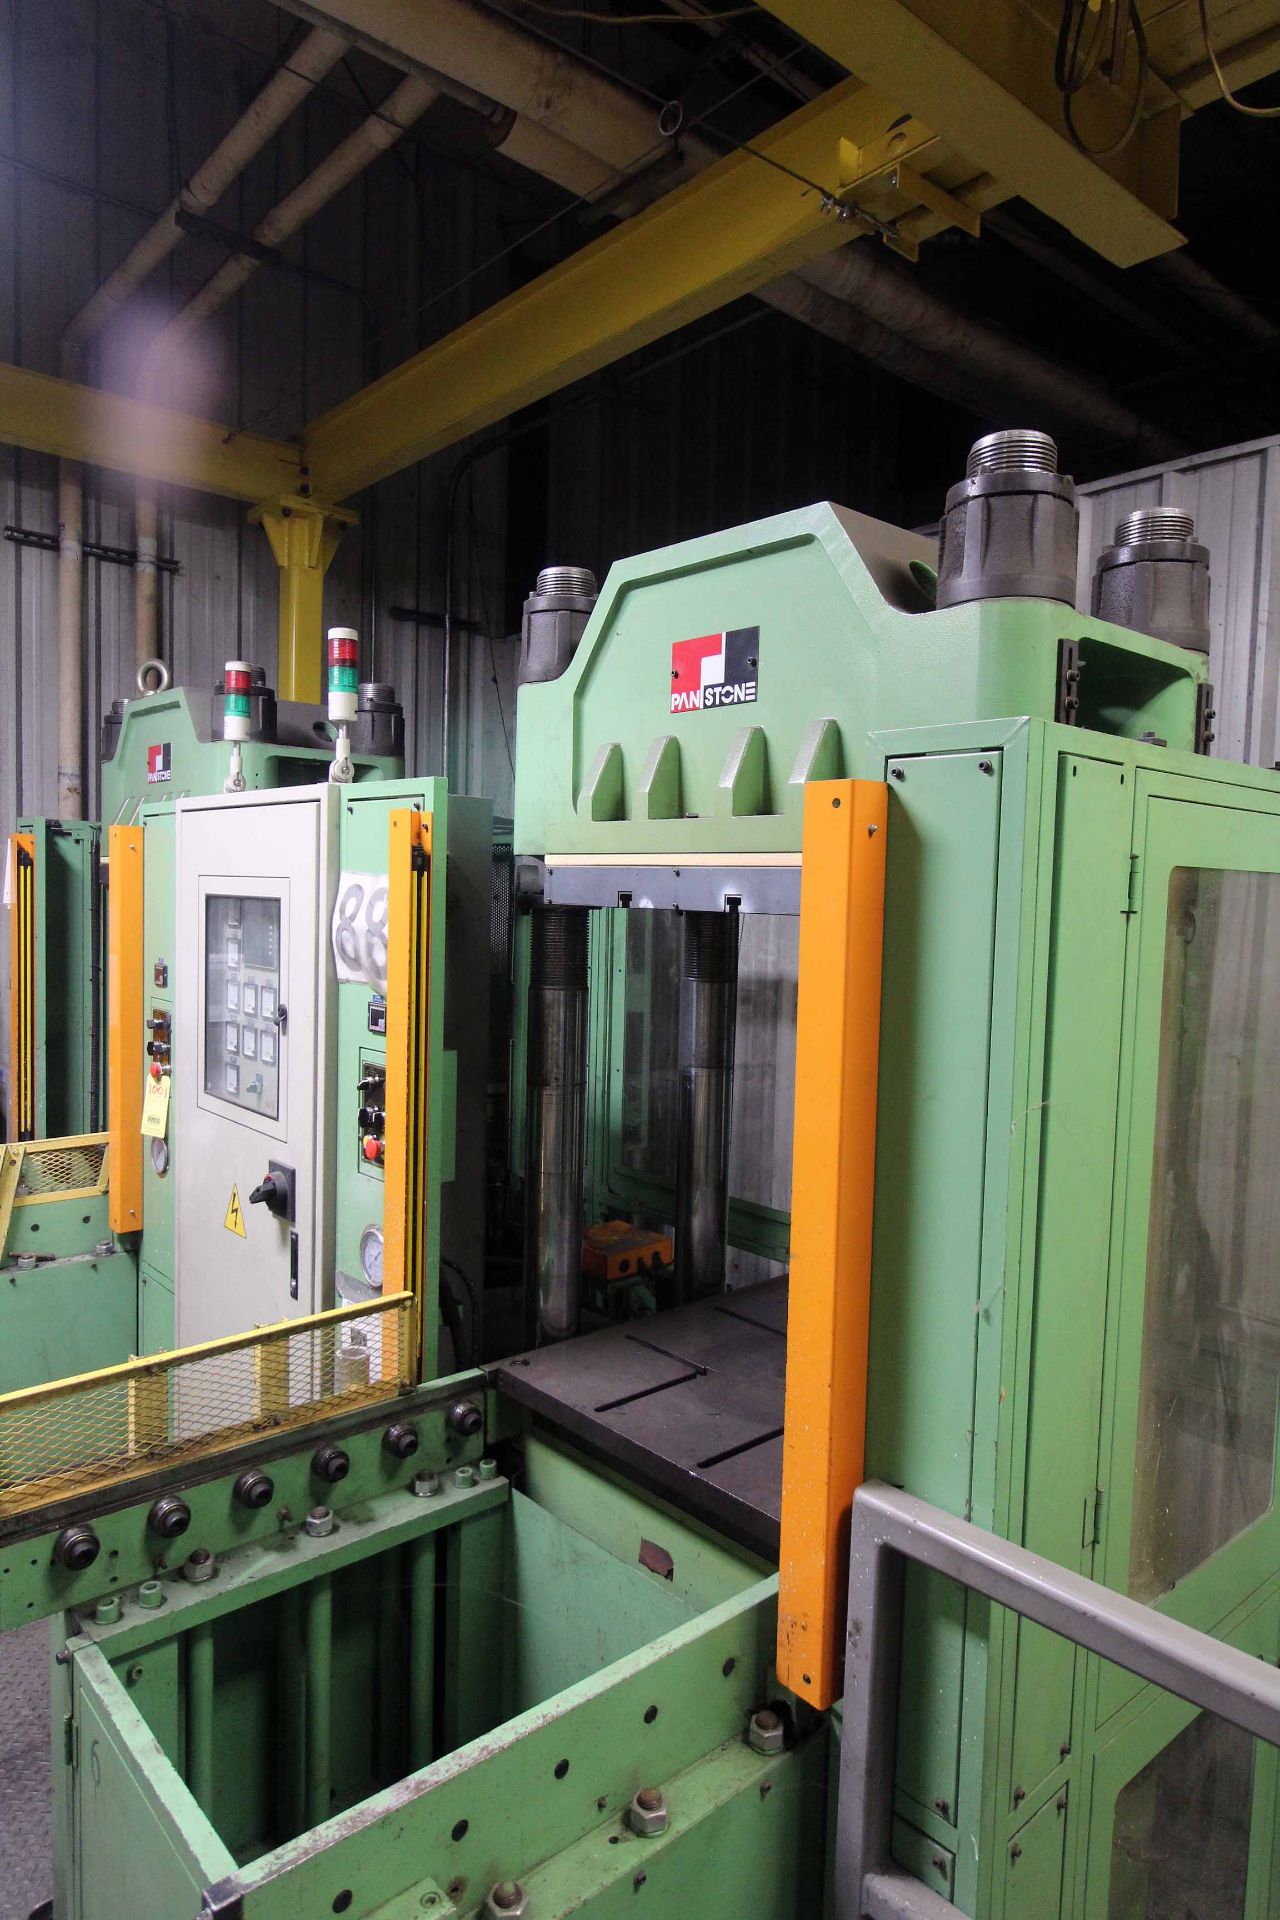 PANSTONE MODEL P-350-A-2-PCD 2-STATION HYDRAULIC COMPRESSION MOLDING PRESS, new 2015, 350 T. CAP. - Image 4 of 7